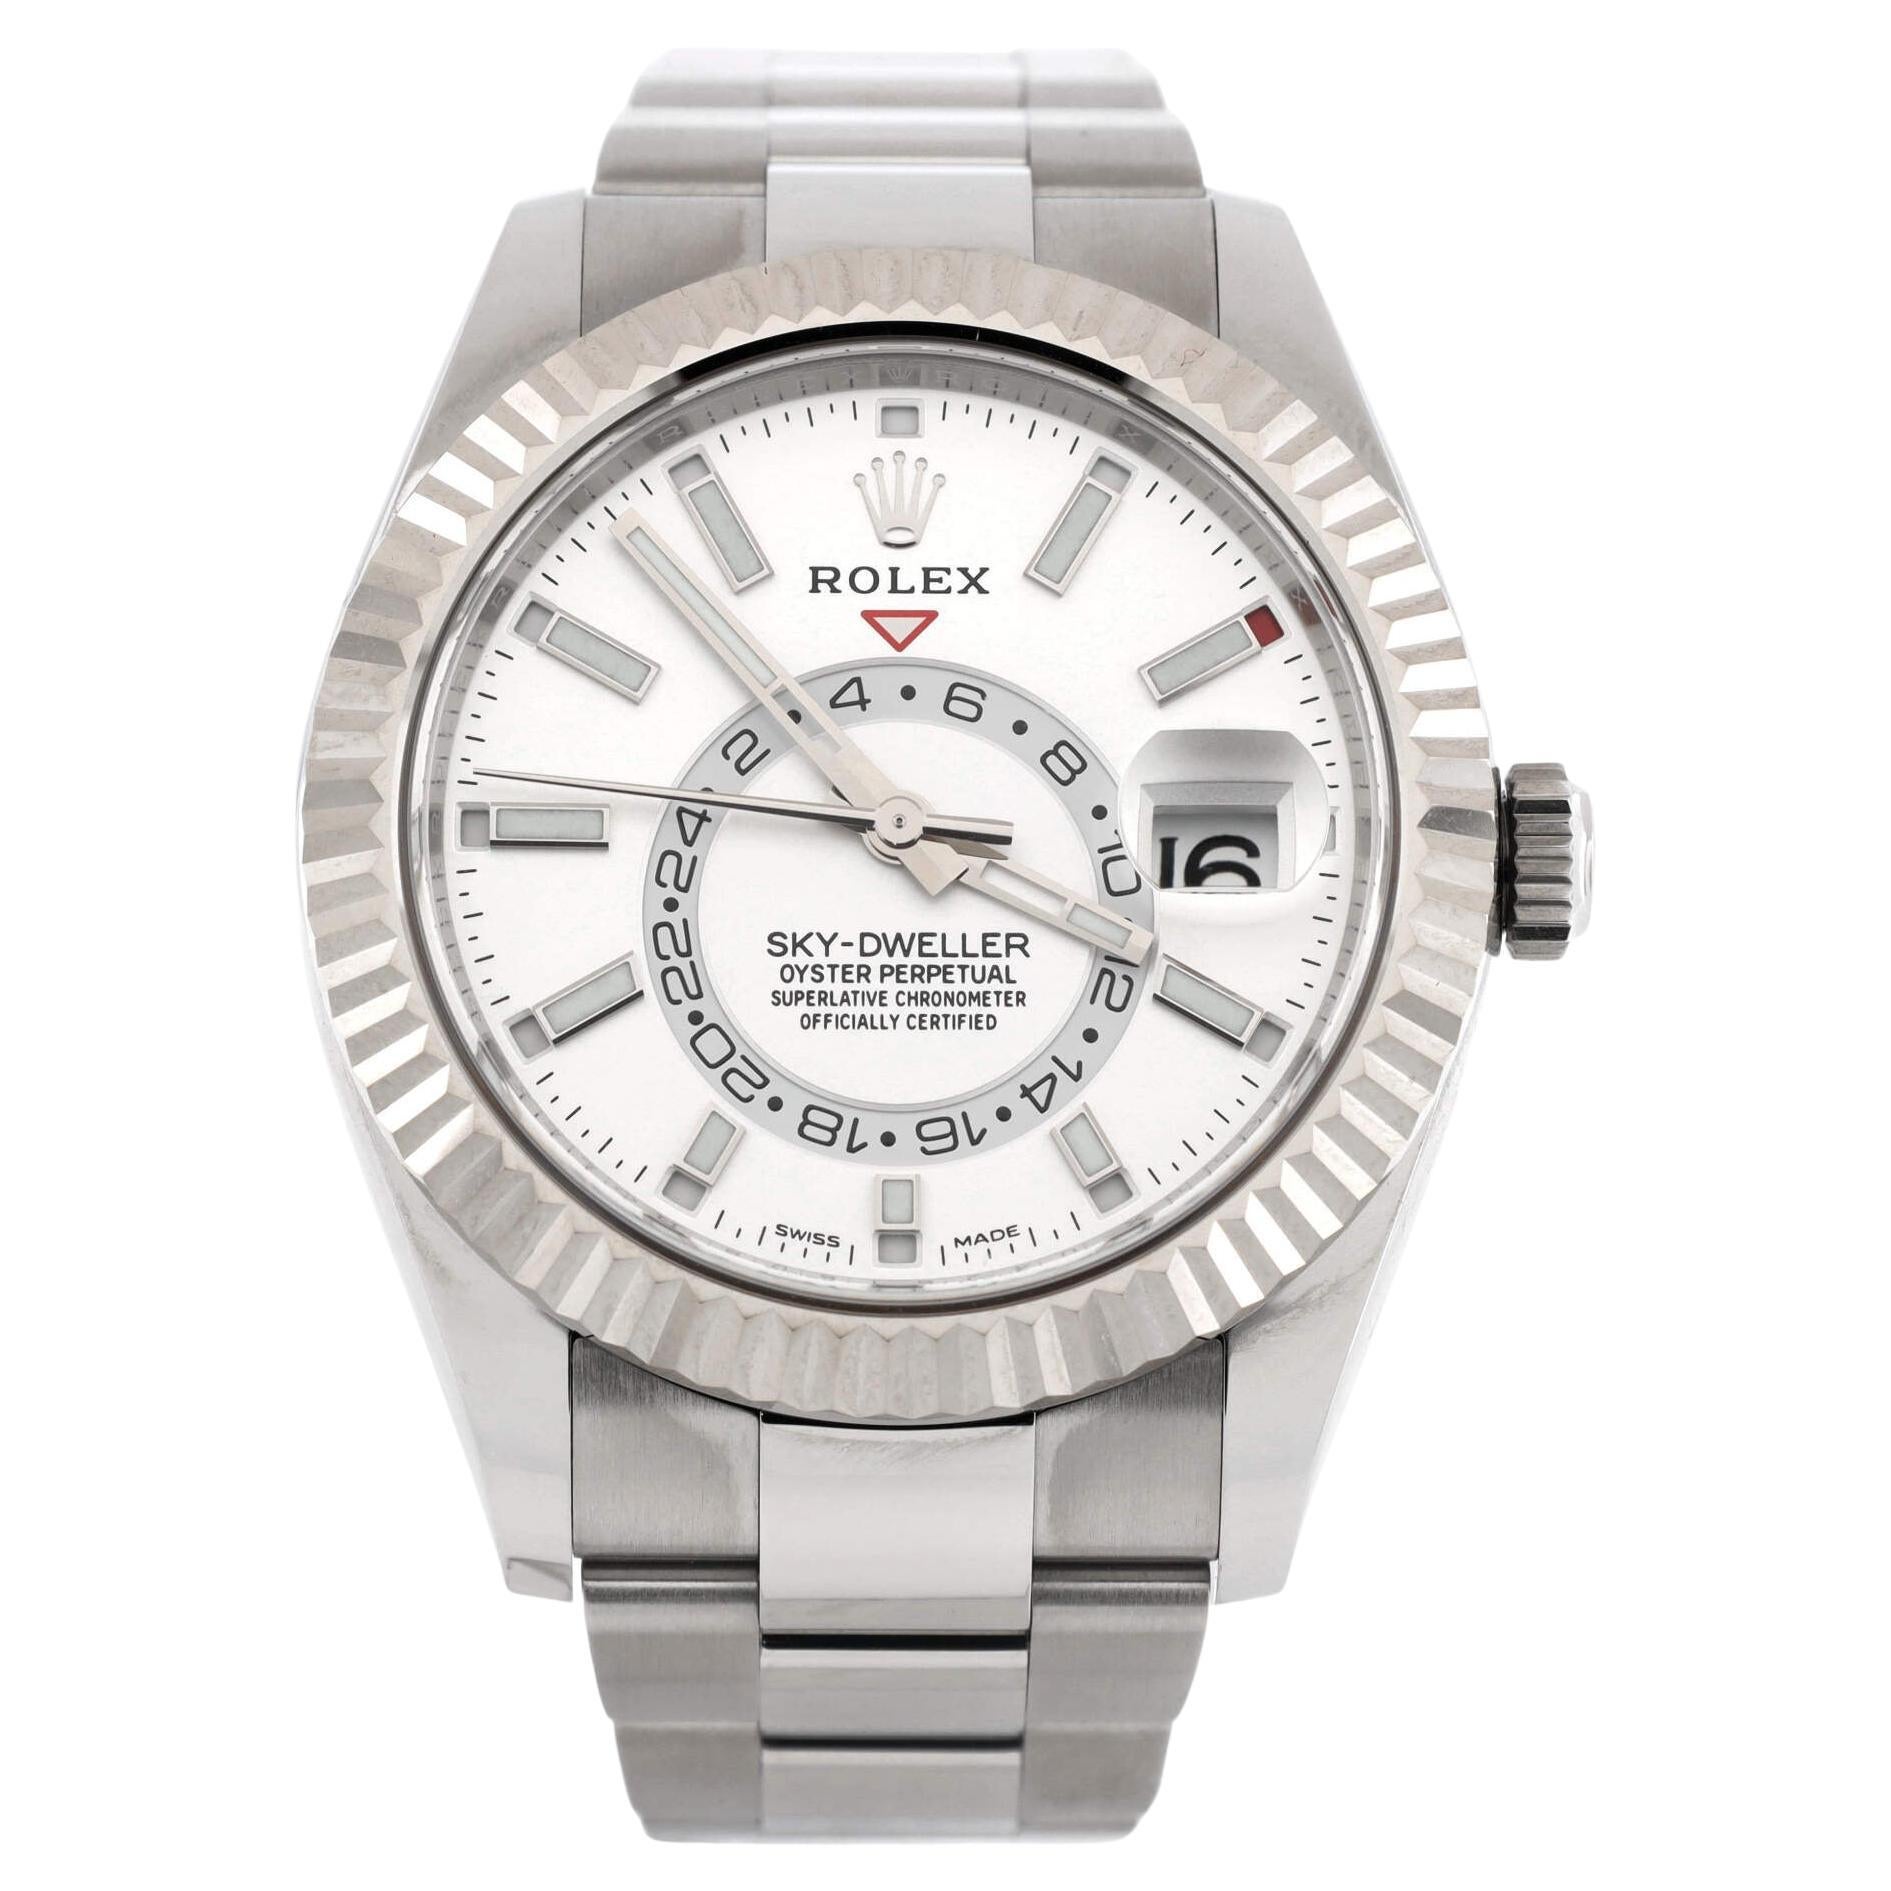 Rolex Sky-Dweller Oyster Perpetual Chronometer Automatic Watch Stainless